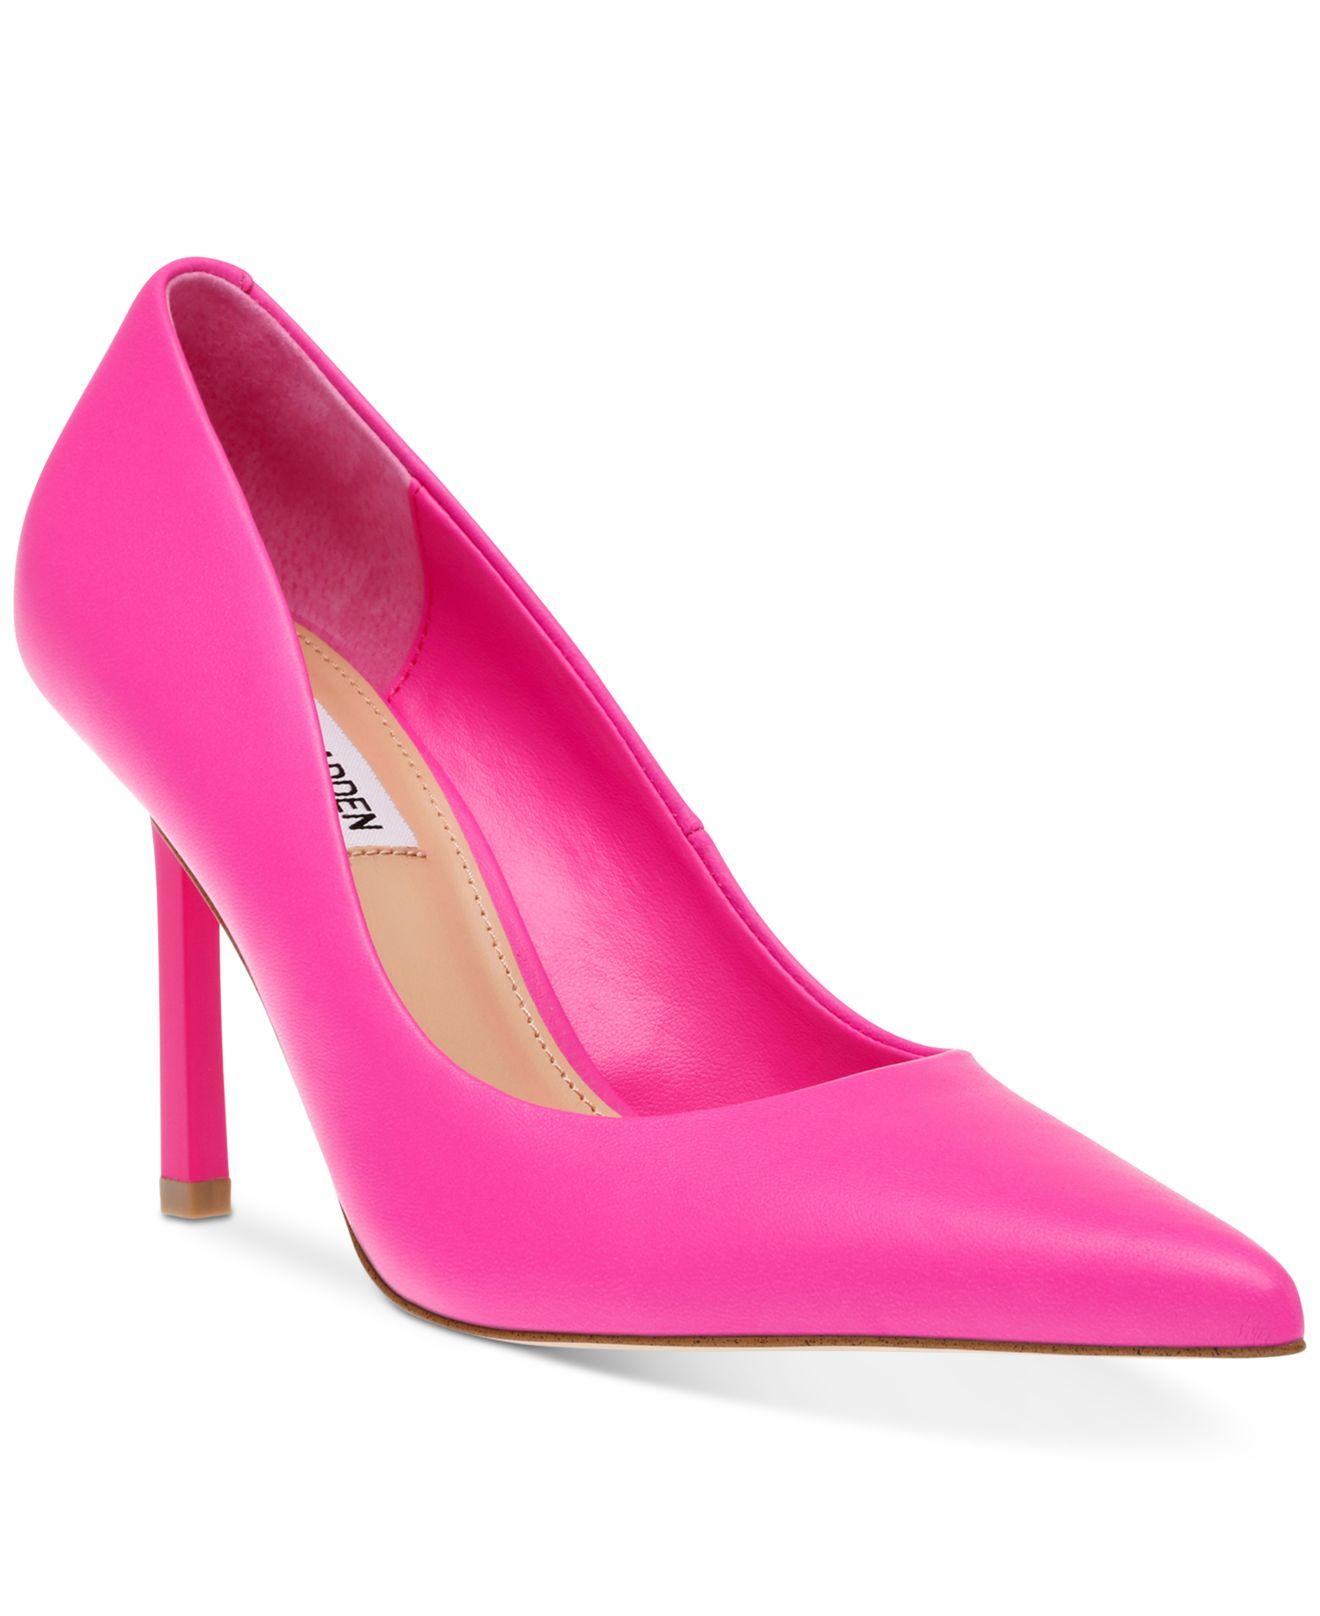 Steve Madden Classie Pointed-toe Stiletto Pumps in Pink | Lyst